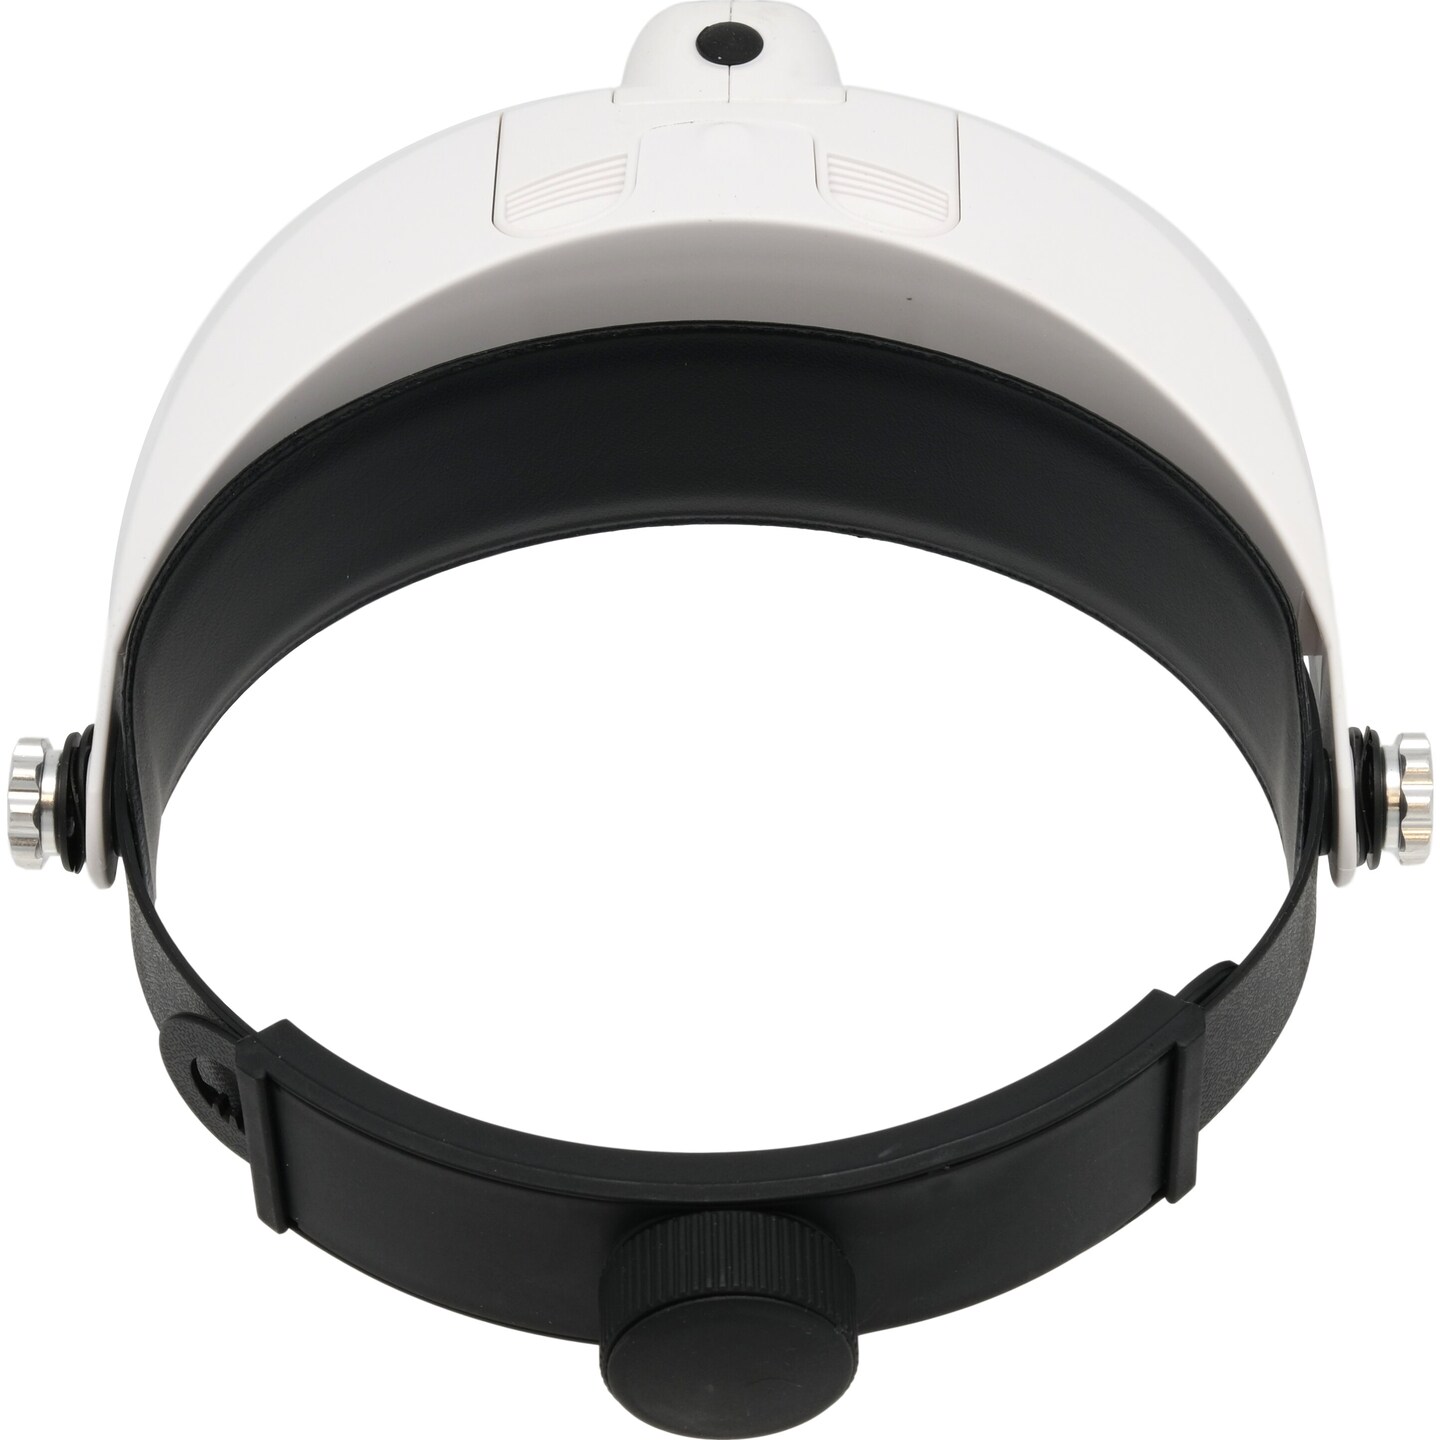 HAWK OPTICALS MG9008 2 LED Head Magnifier with Extra Lenses, White